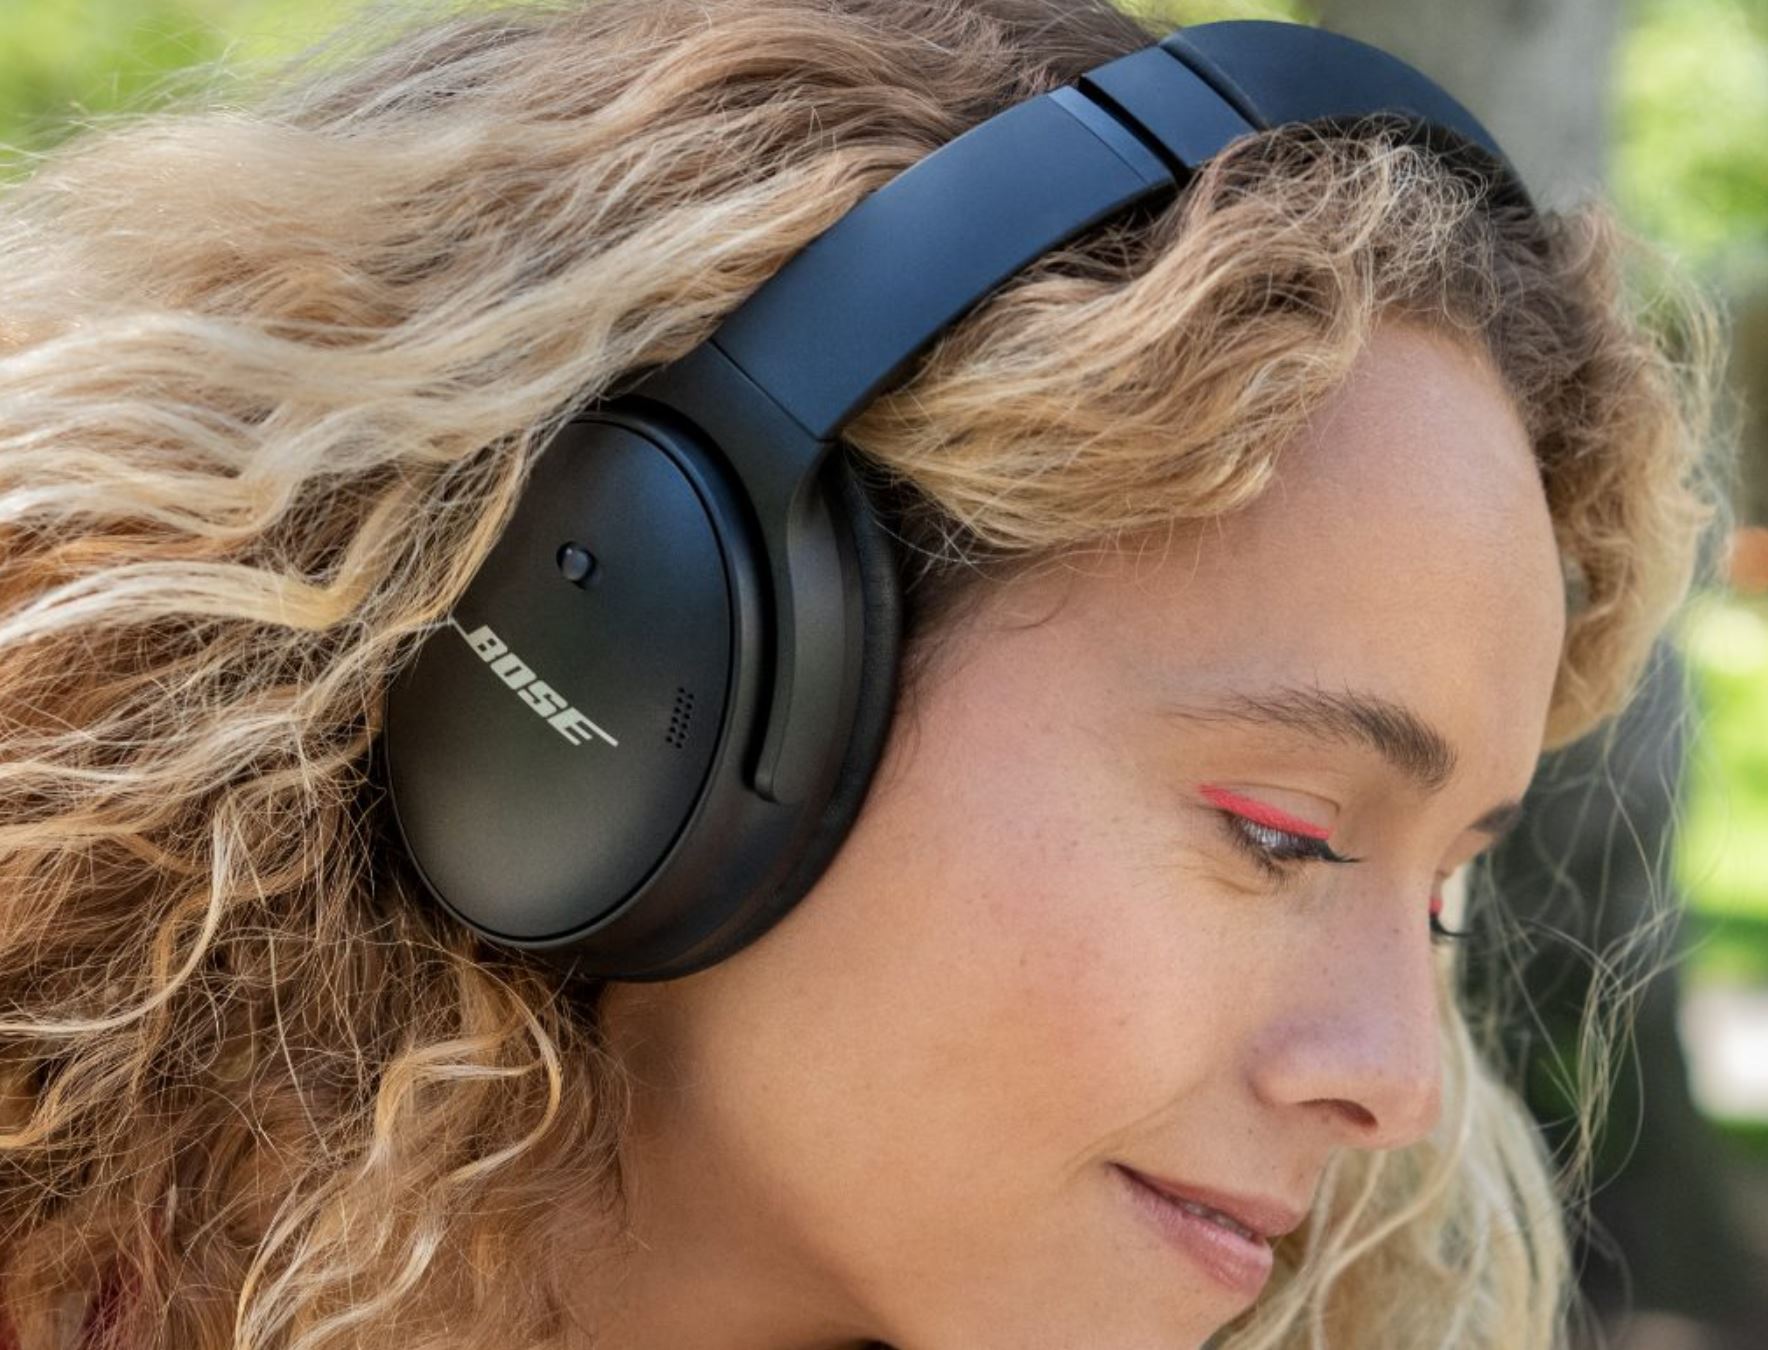 Bose QuietComfort 45 BT, ANC Headphones – travellers cans (QC45 review)